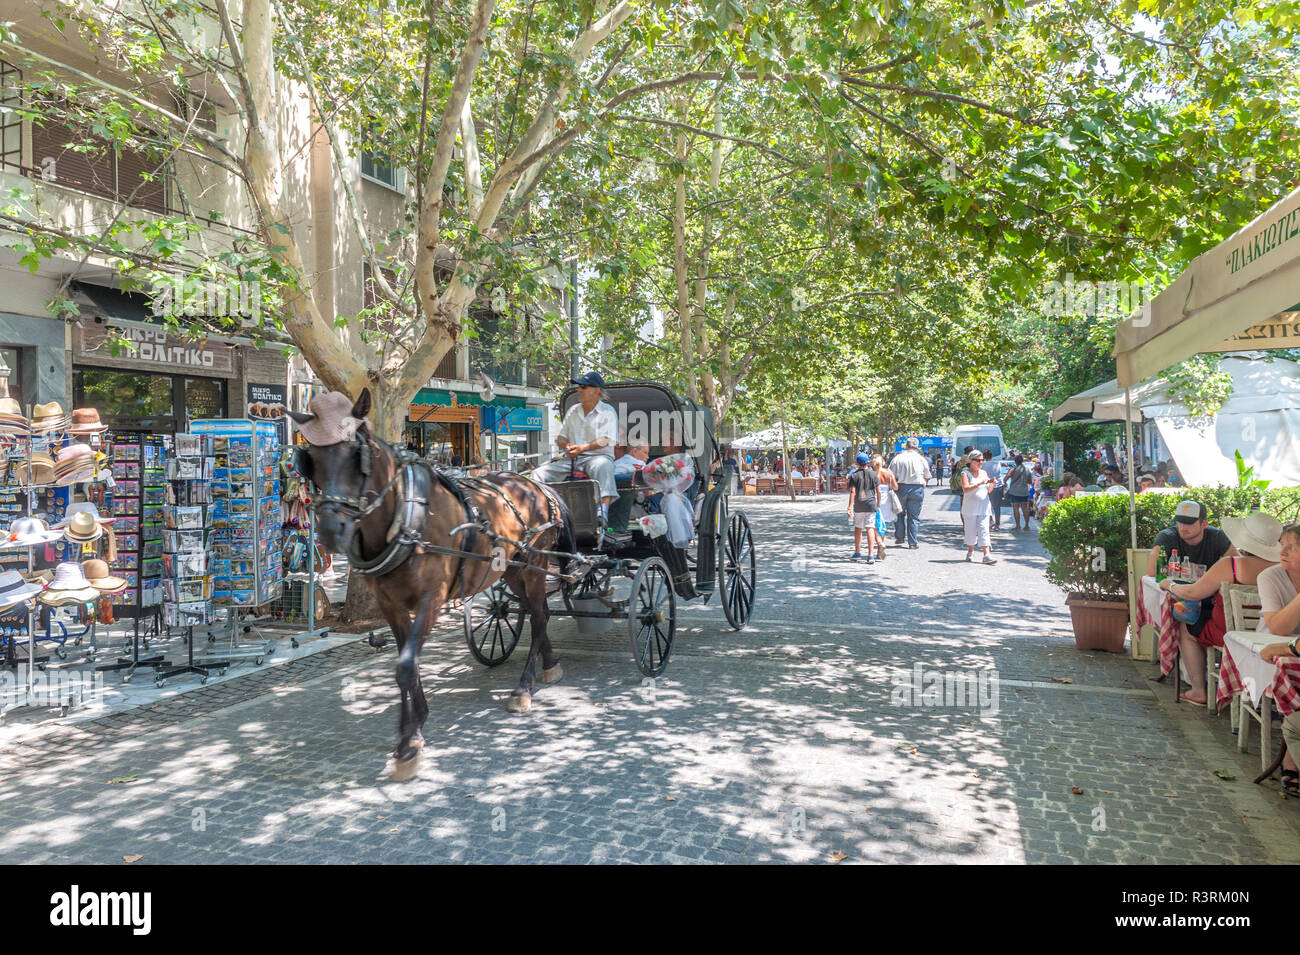 Carriage ride in the Plaka, Athens, Greece Stock Photo